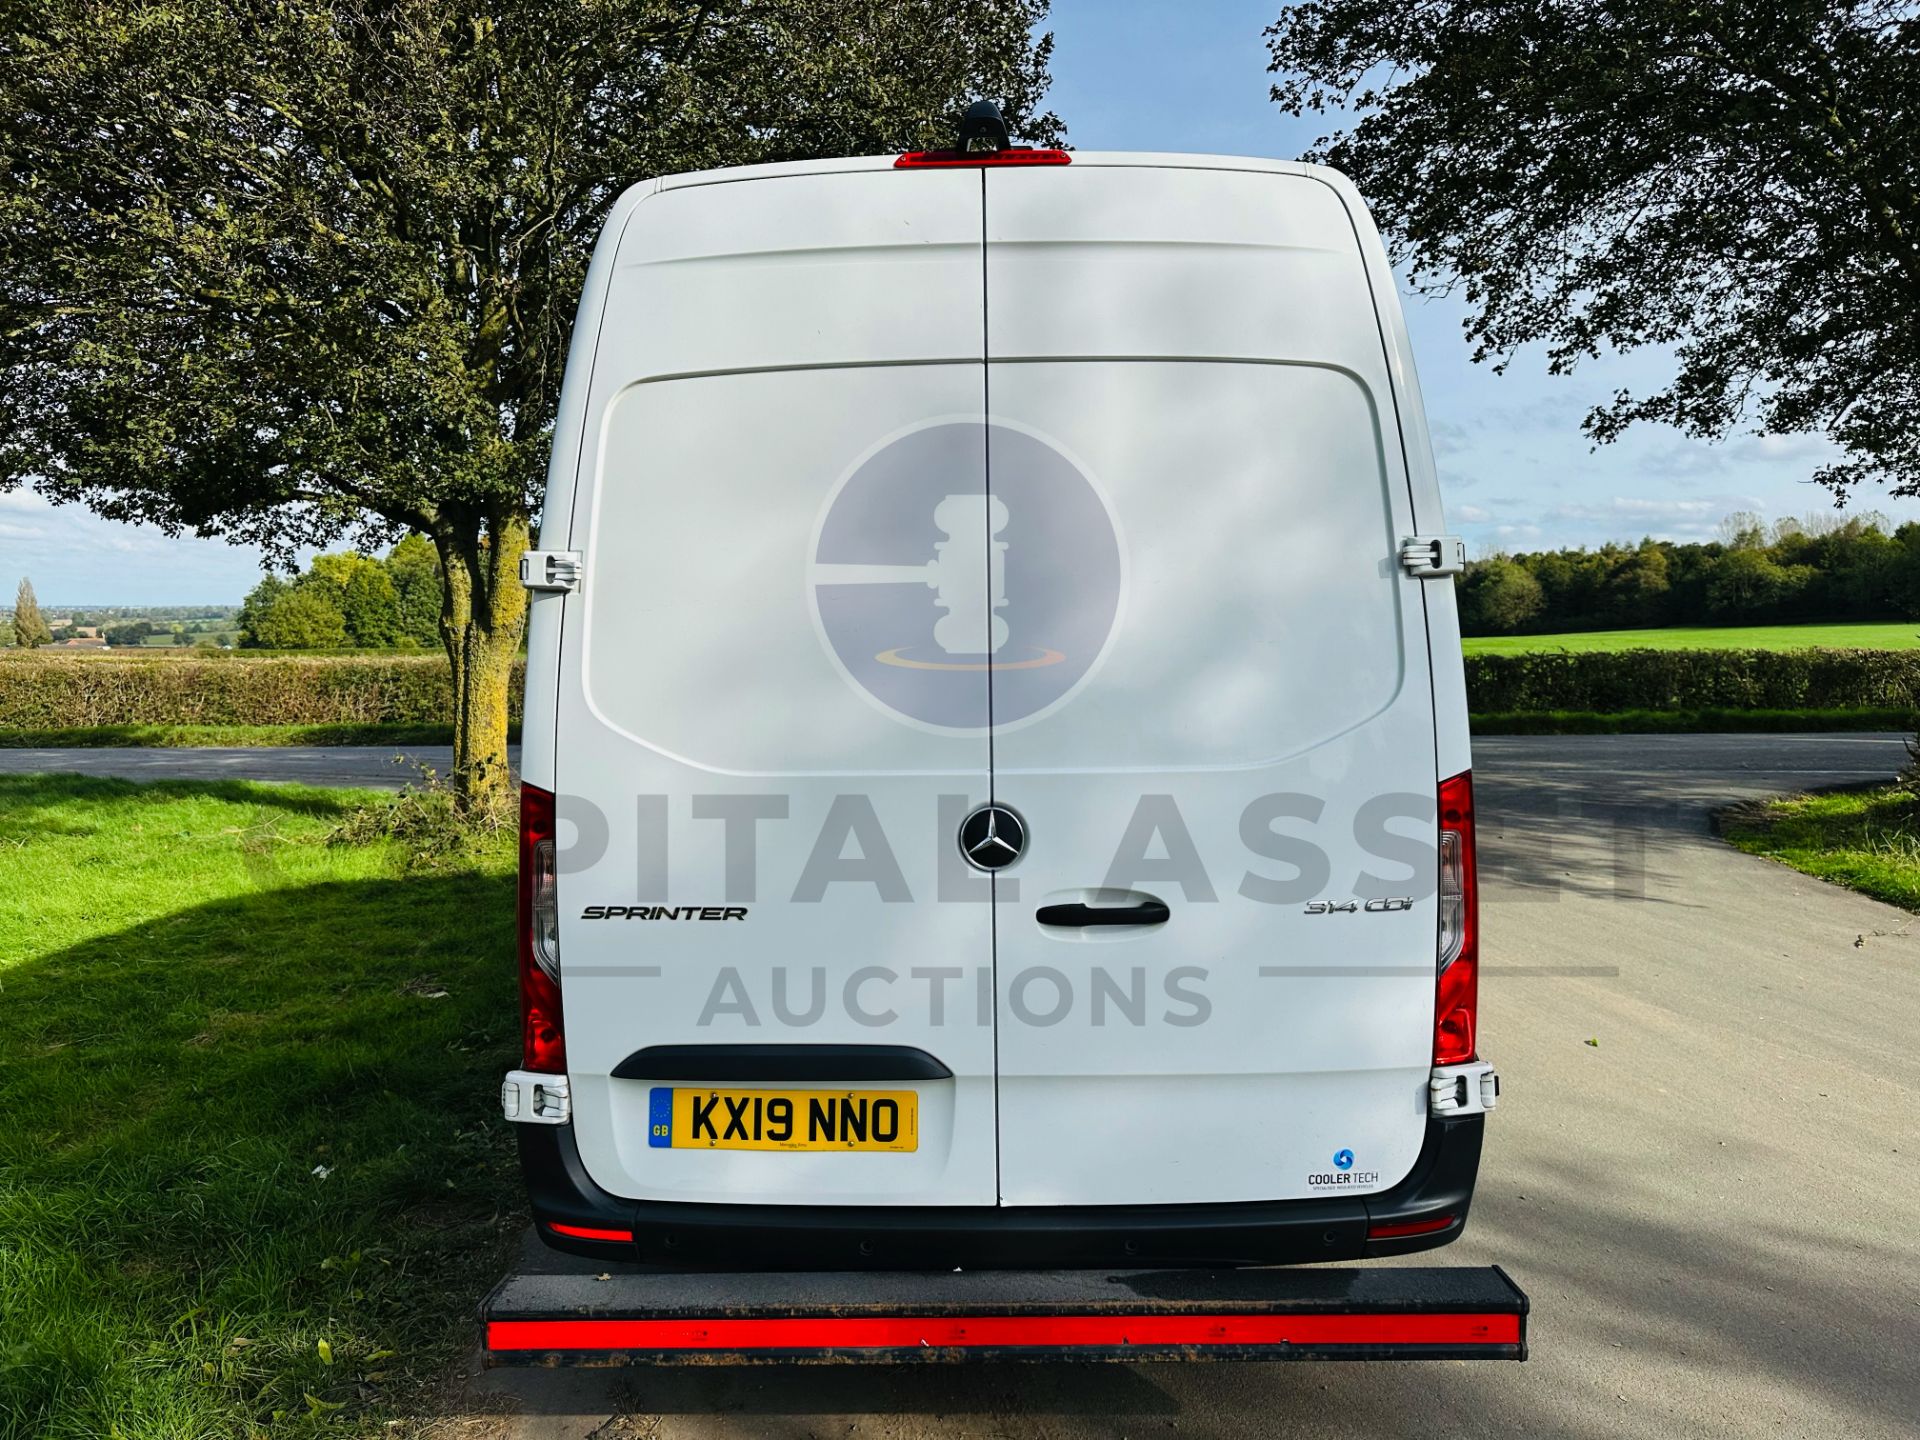 MERCEDES-BENZ SPRINTER 314 CDI *MWB - REFRIGERATED VAN* (2019 - FACELIFT MODEL) *OVERNIGHT STANDBY* - Image 12 of 44